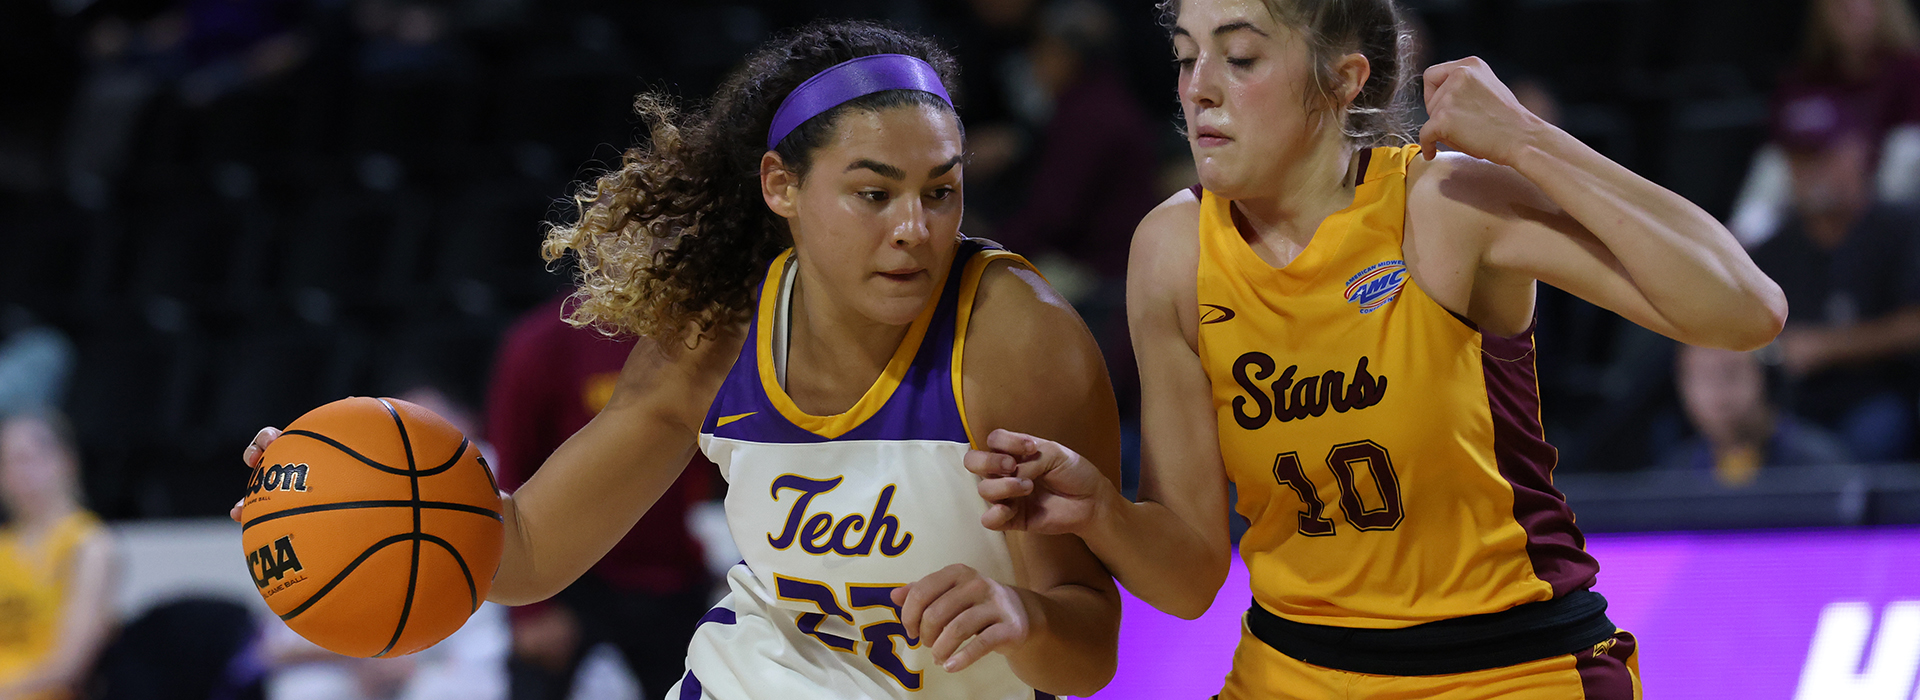 Second-quarter surge holds off Stephens in Purple Palooza exhibition win